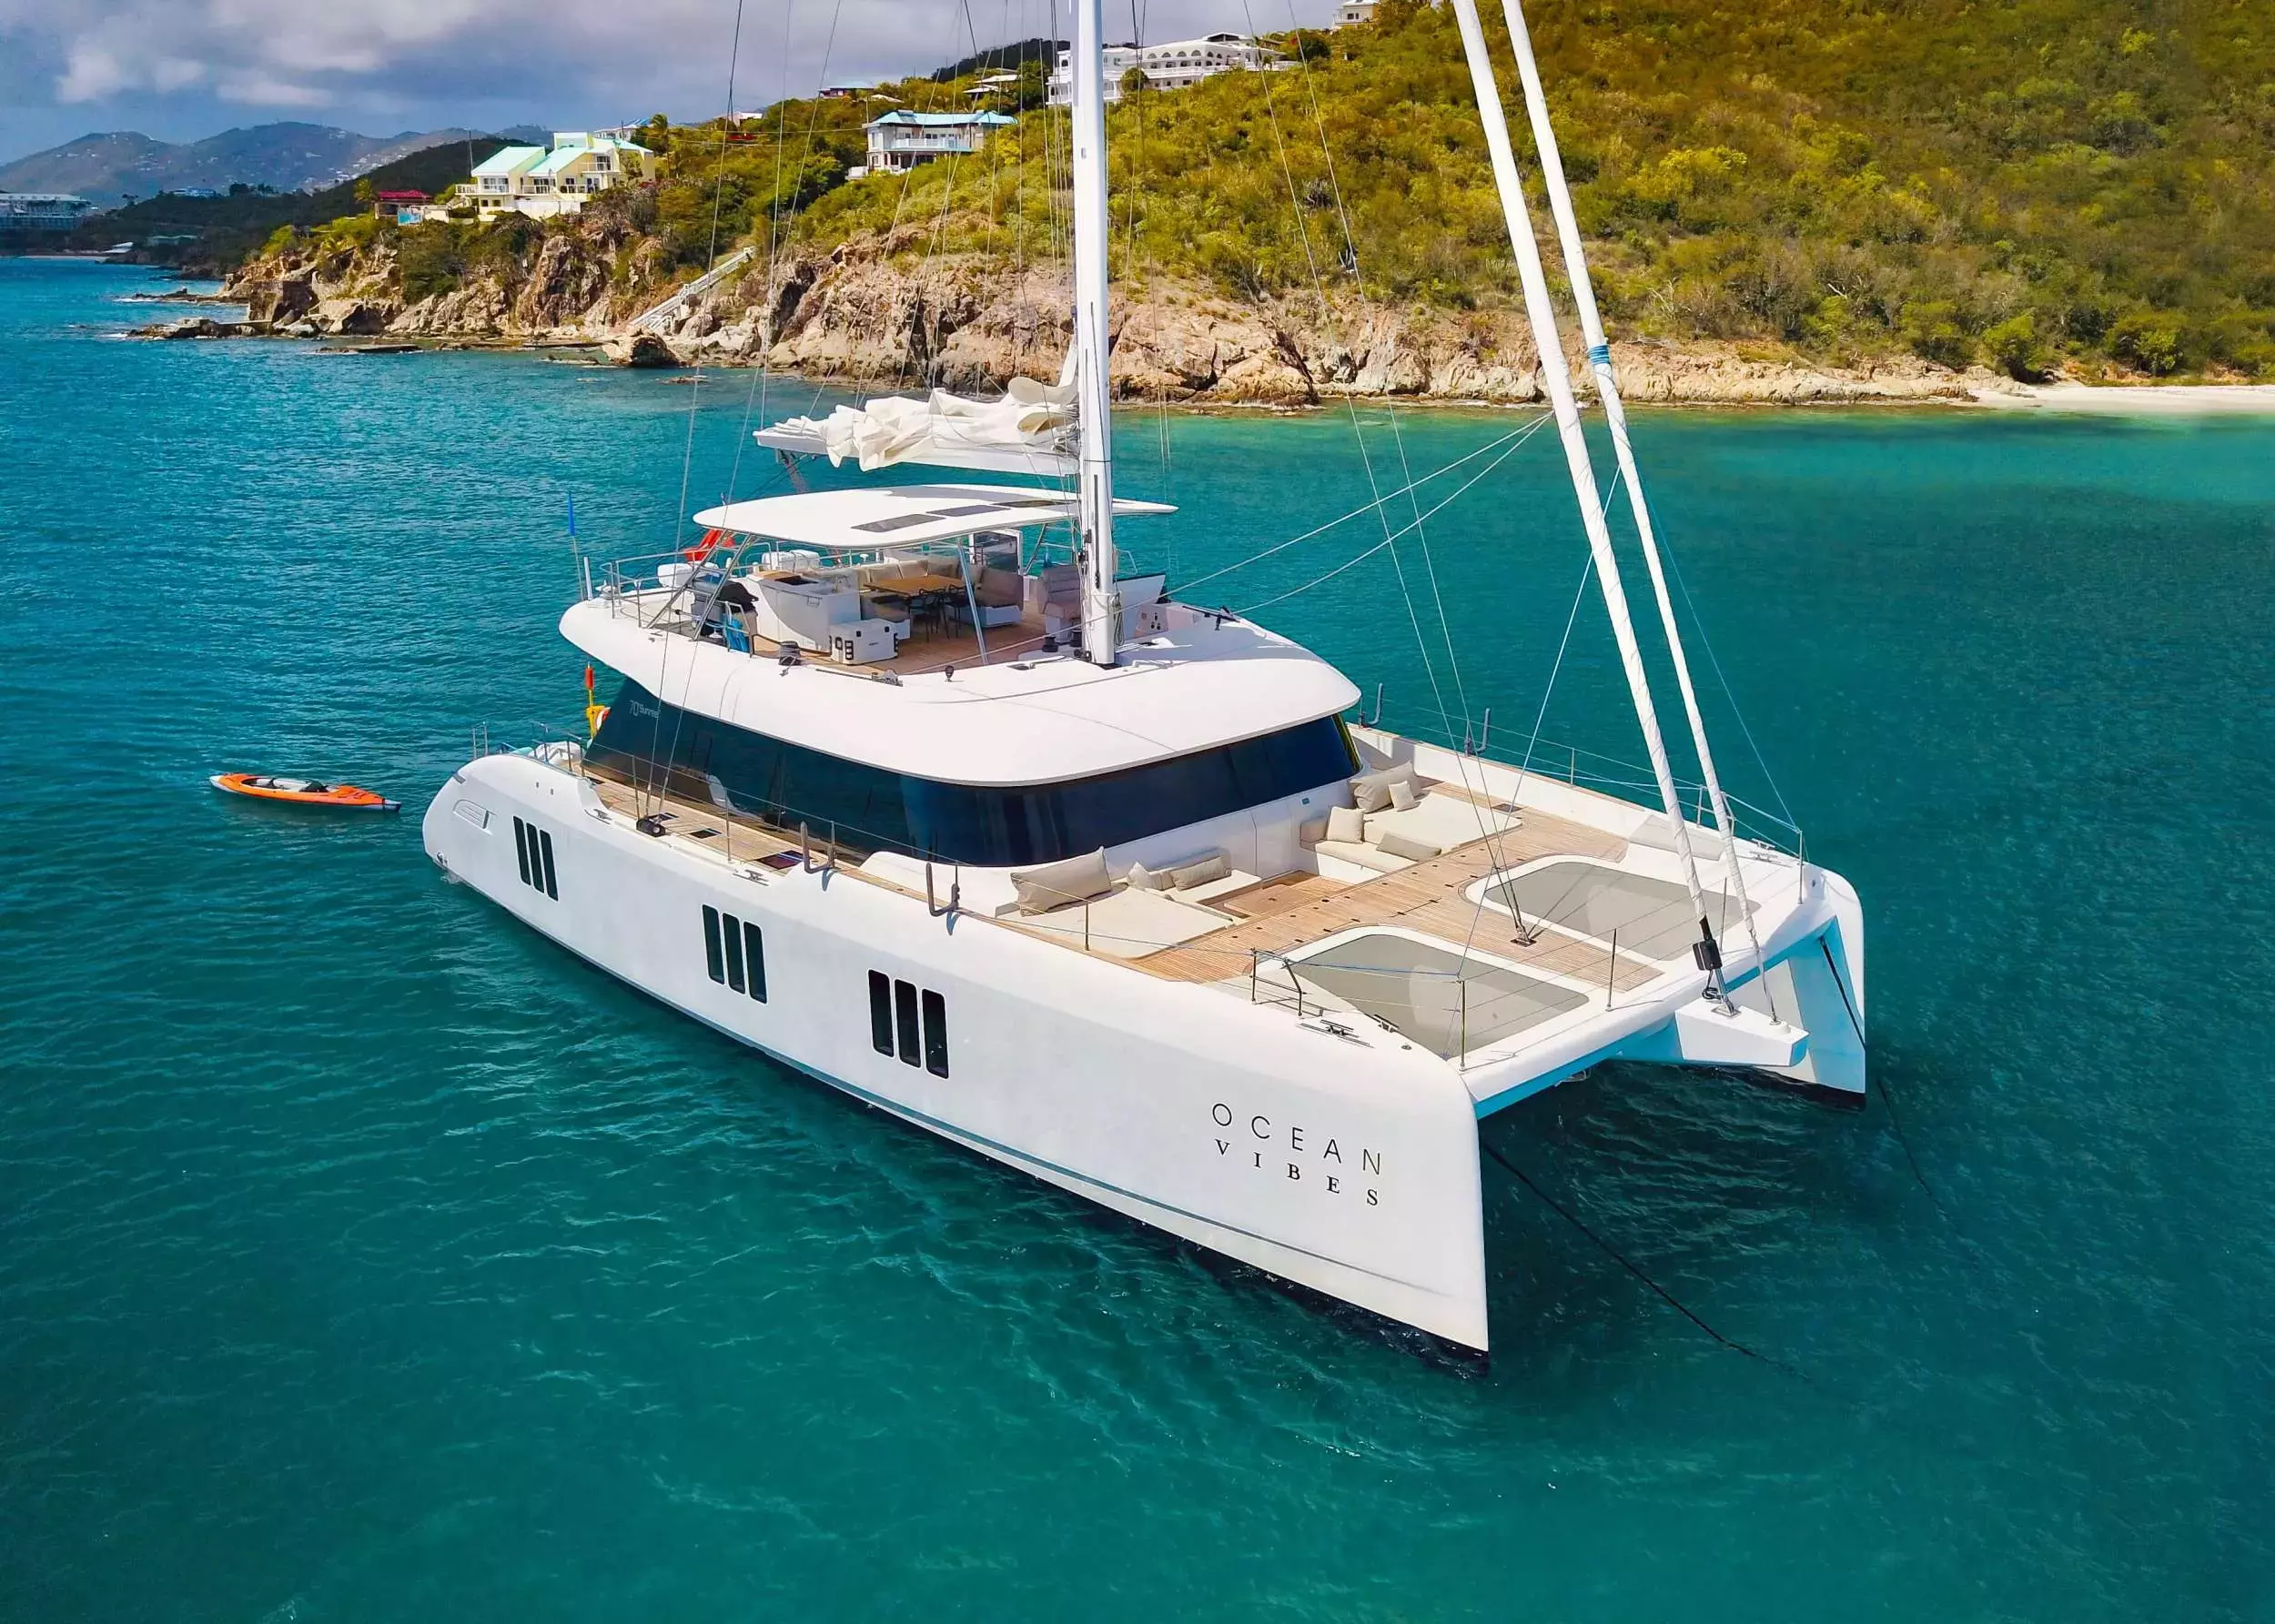 Ocean Vibes by Sunreef Yachts - Special Offer for a private Sailing Catamaran Rental in Virgin Gorda with a crew